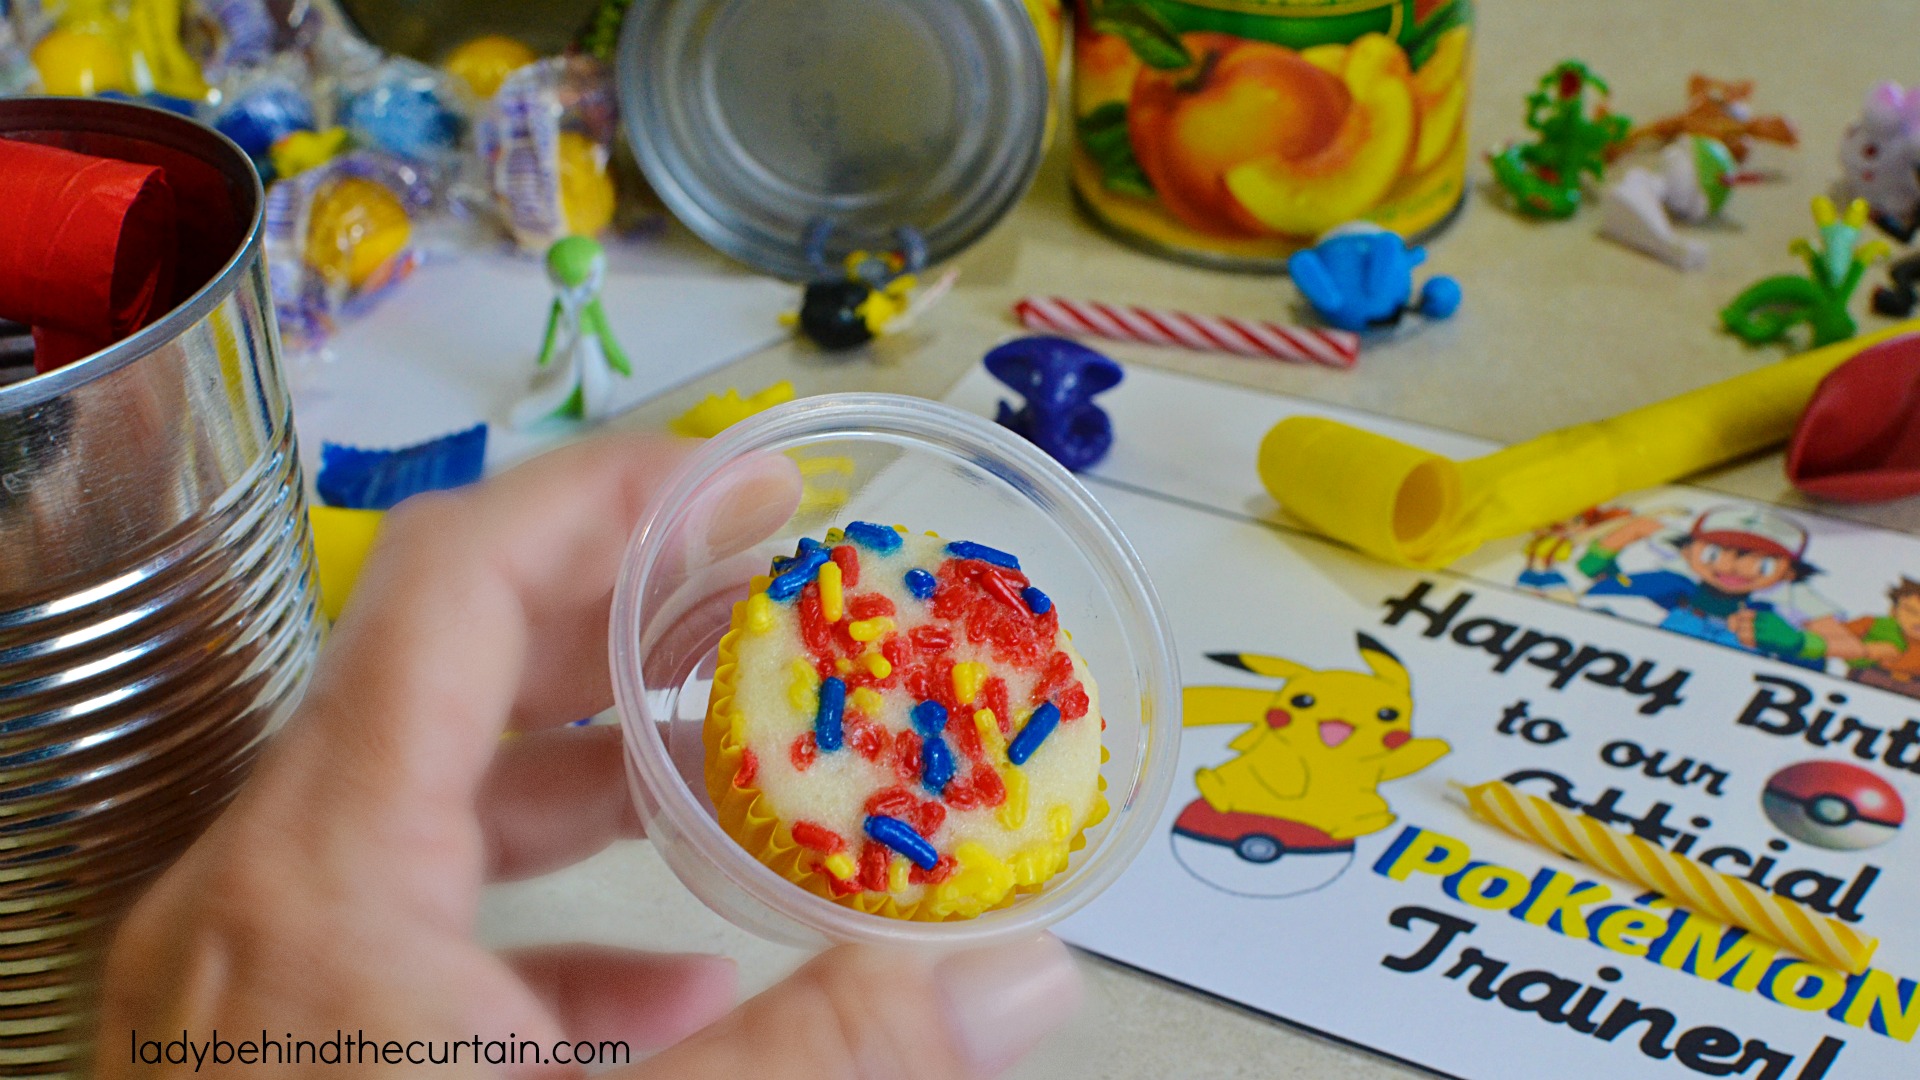 Traveling Pokémon Go Birthday Party | Send a fun filled Pokémon party to someone or hand them out to your guests as a party favor! 